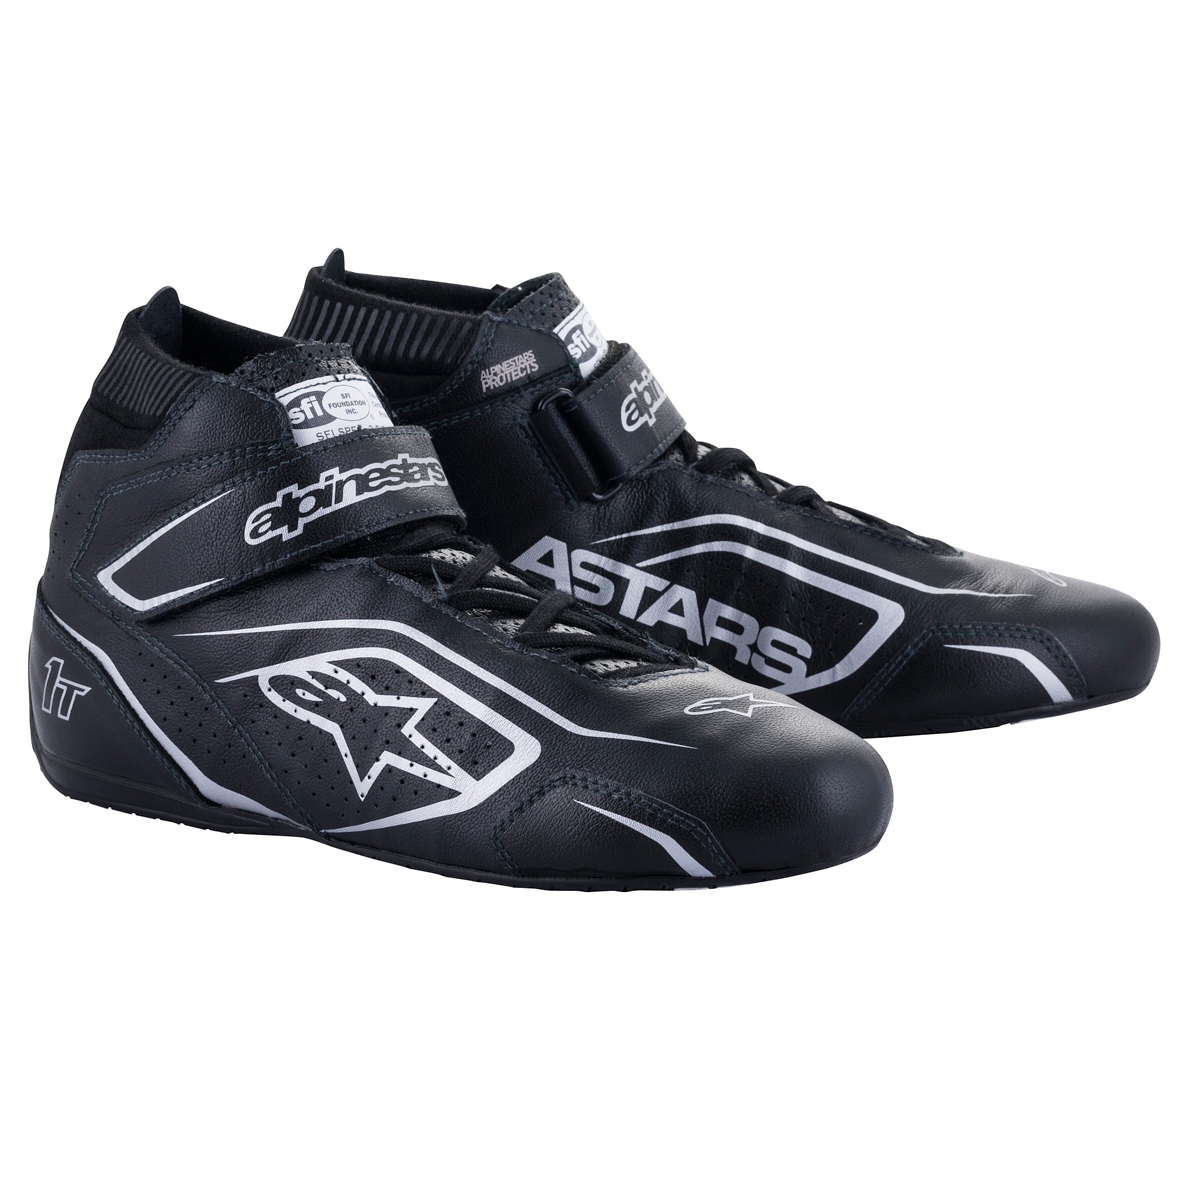 Alpinestars 2710122-119-10 Driving Shoe, Tech 1-T V3, Mid-Top, SFI 3.3, Leather Outer, Nomex Inner, Black / Silver, Size 10, Pair